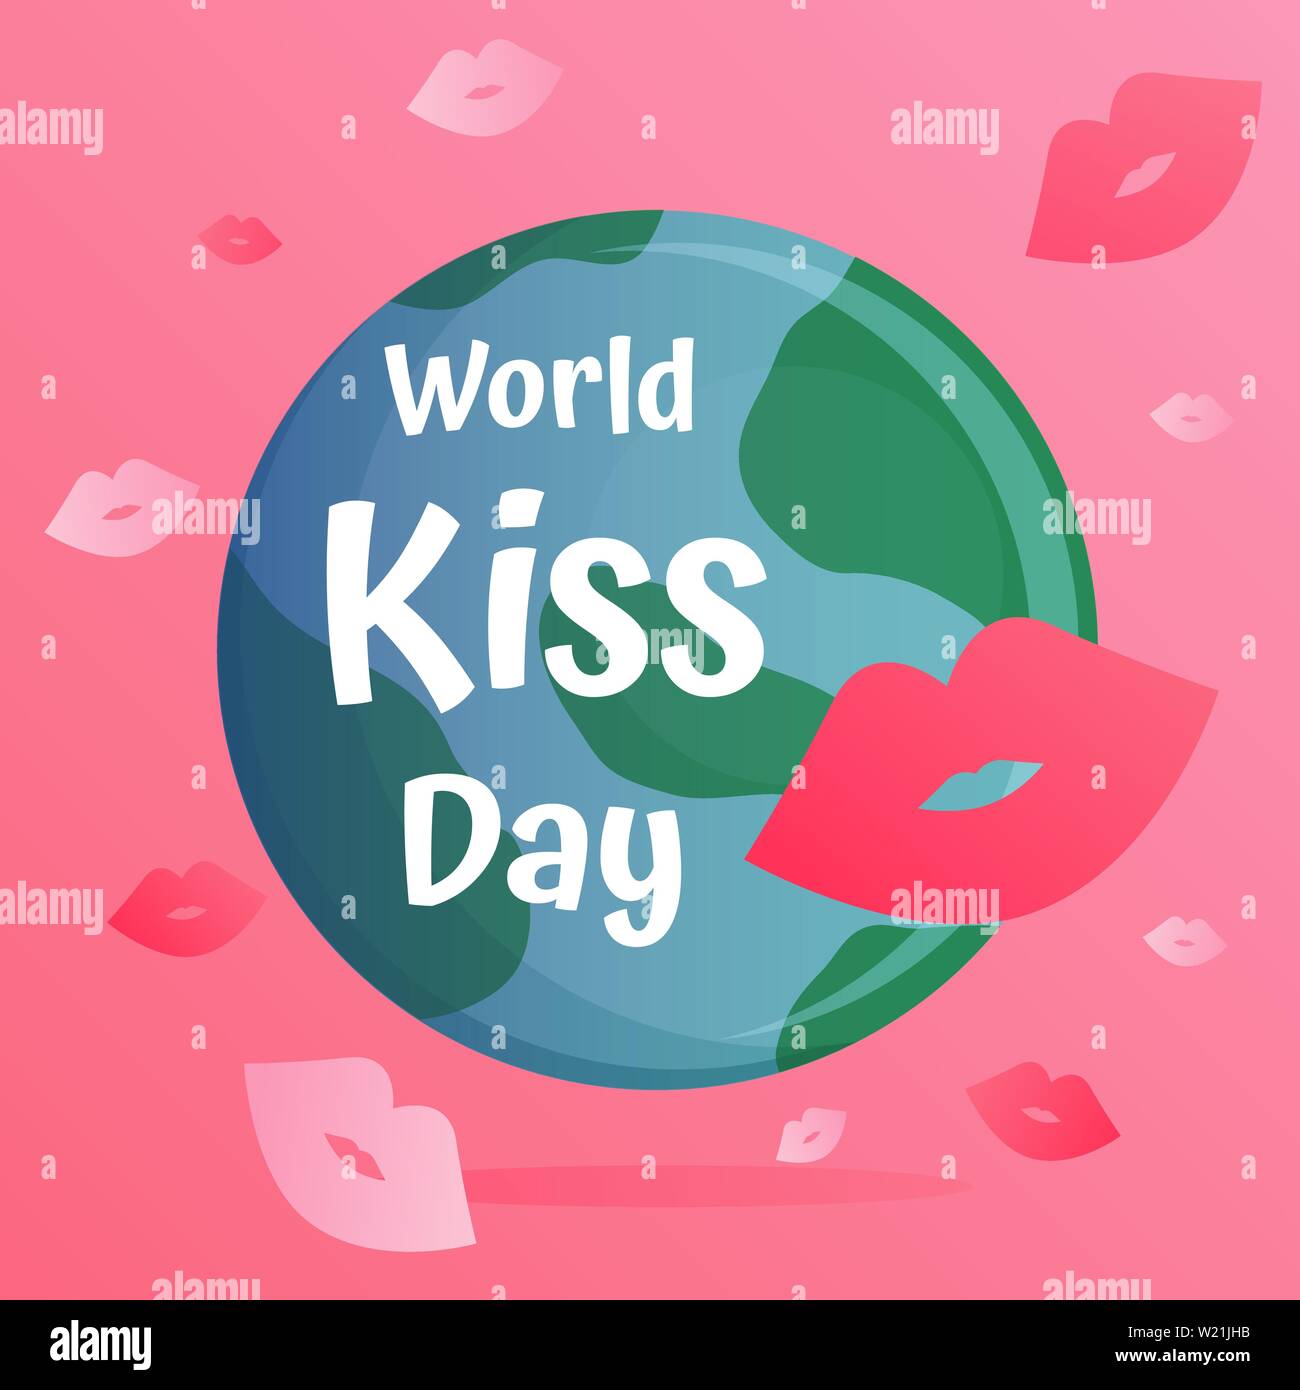 World kiss day vector with kiss icons on pink background Stock Vector